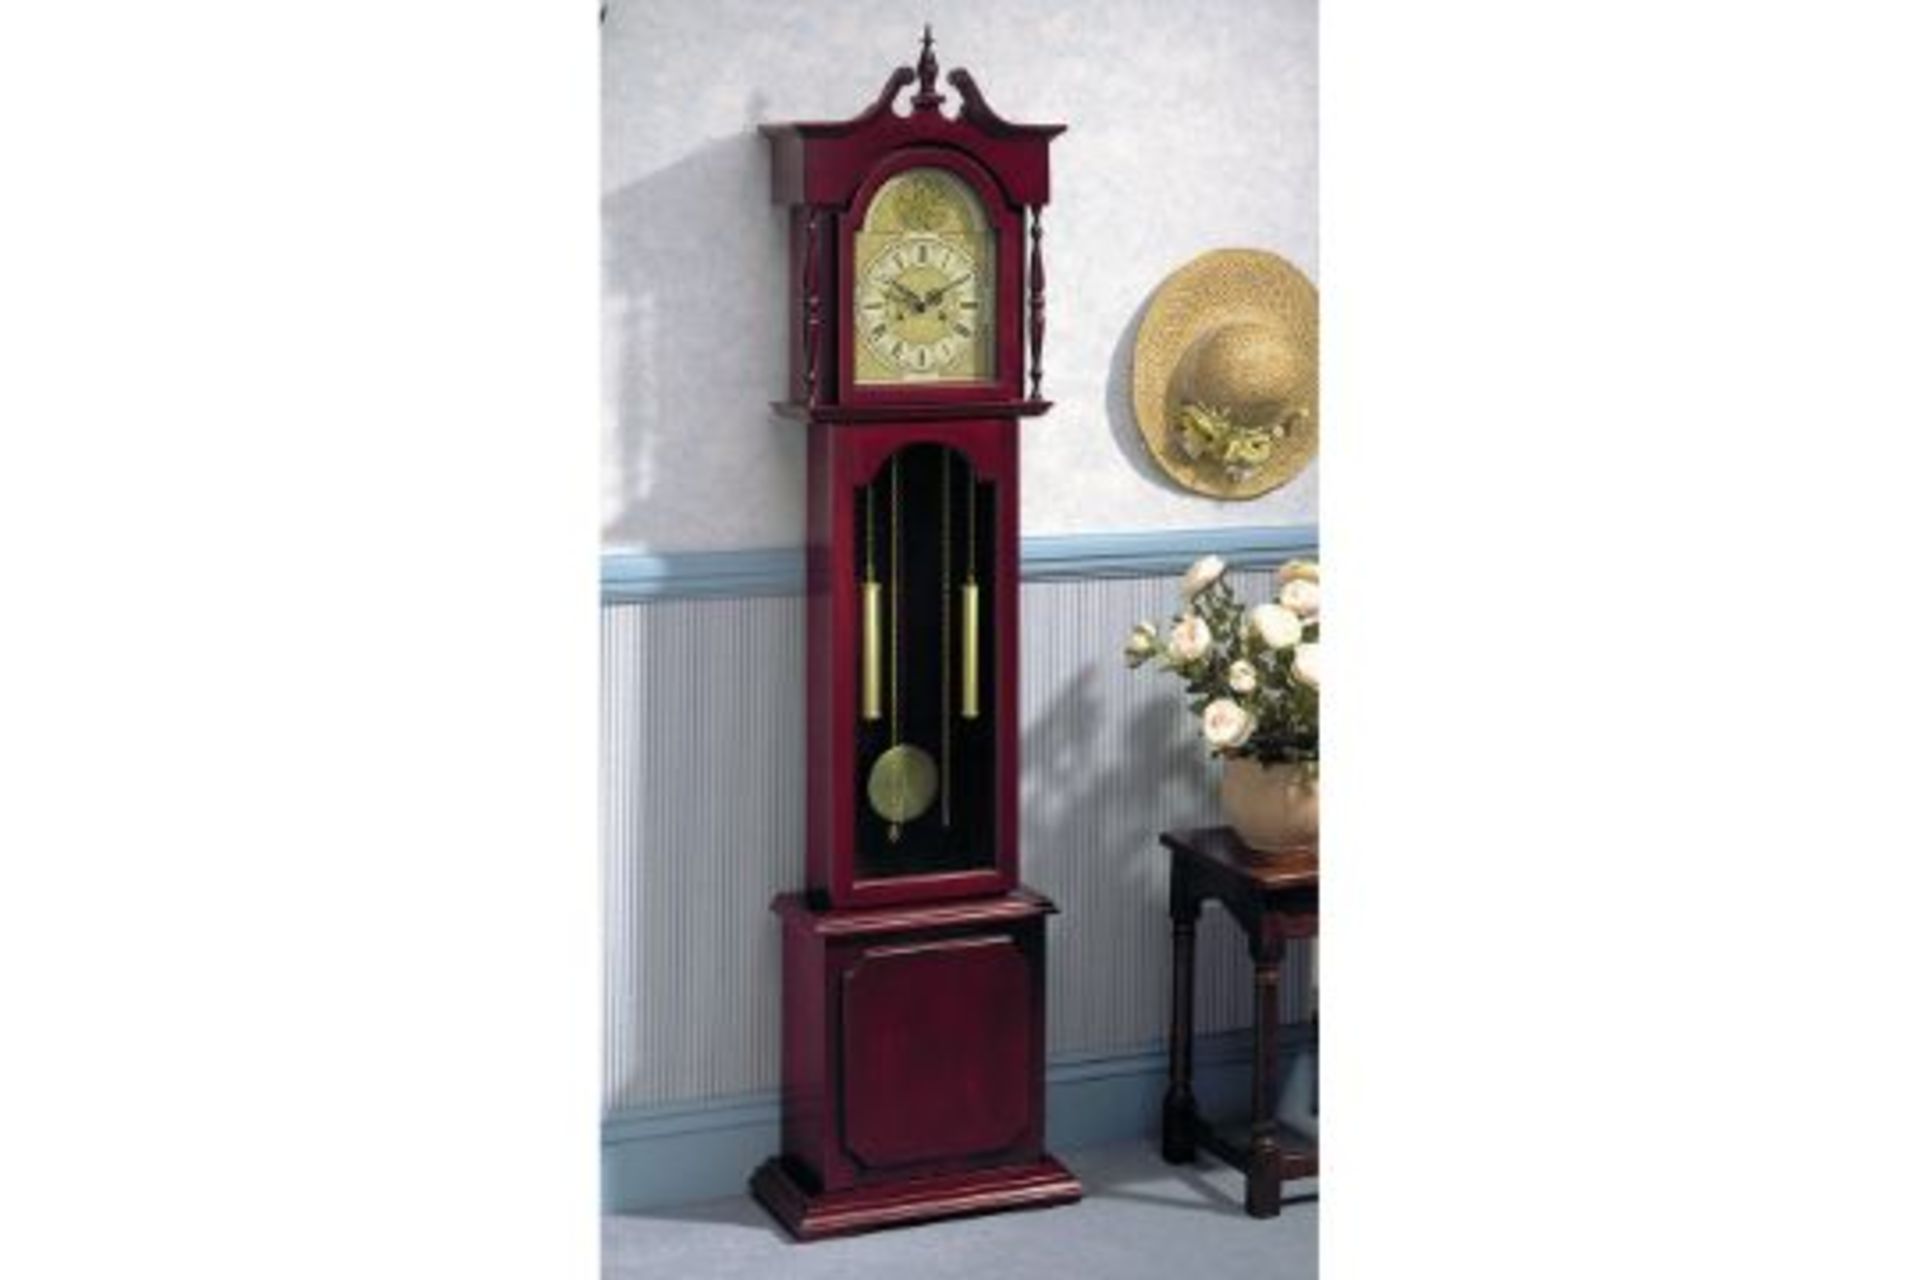 The Belgravia grandfather clock, with its stylish, traditional design would look great in any room